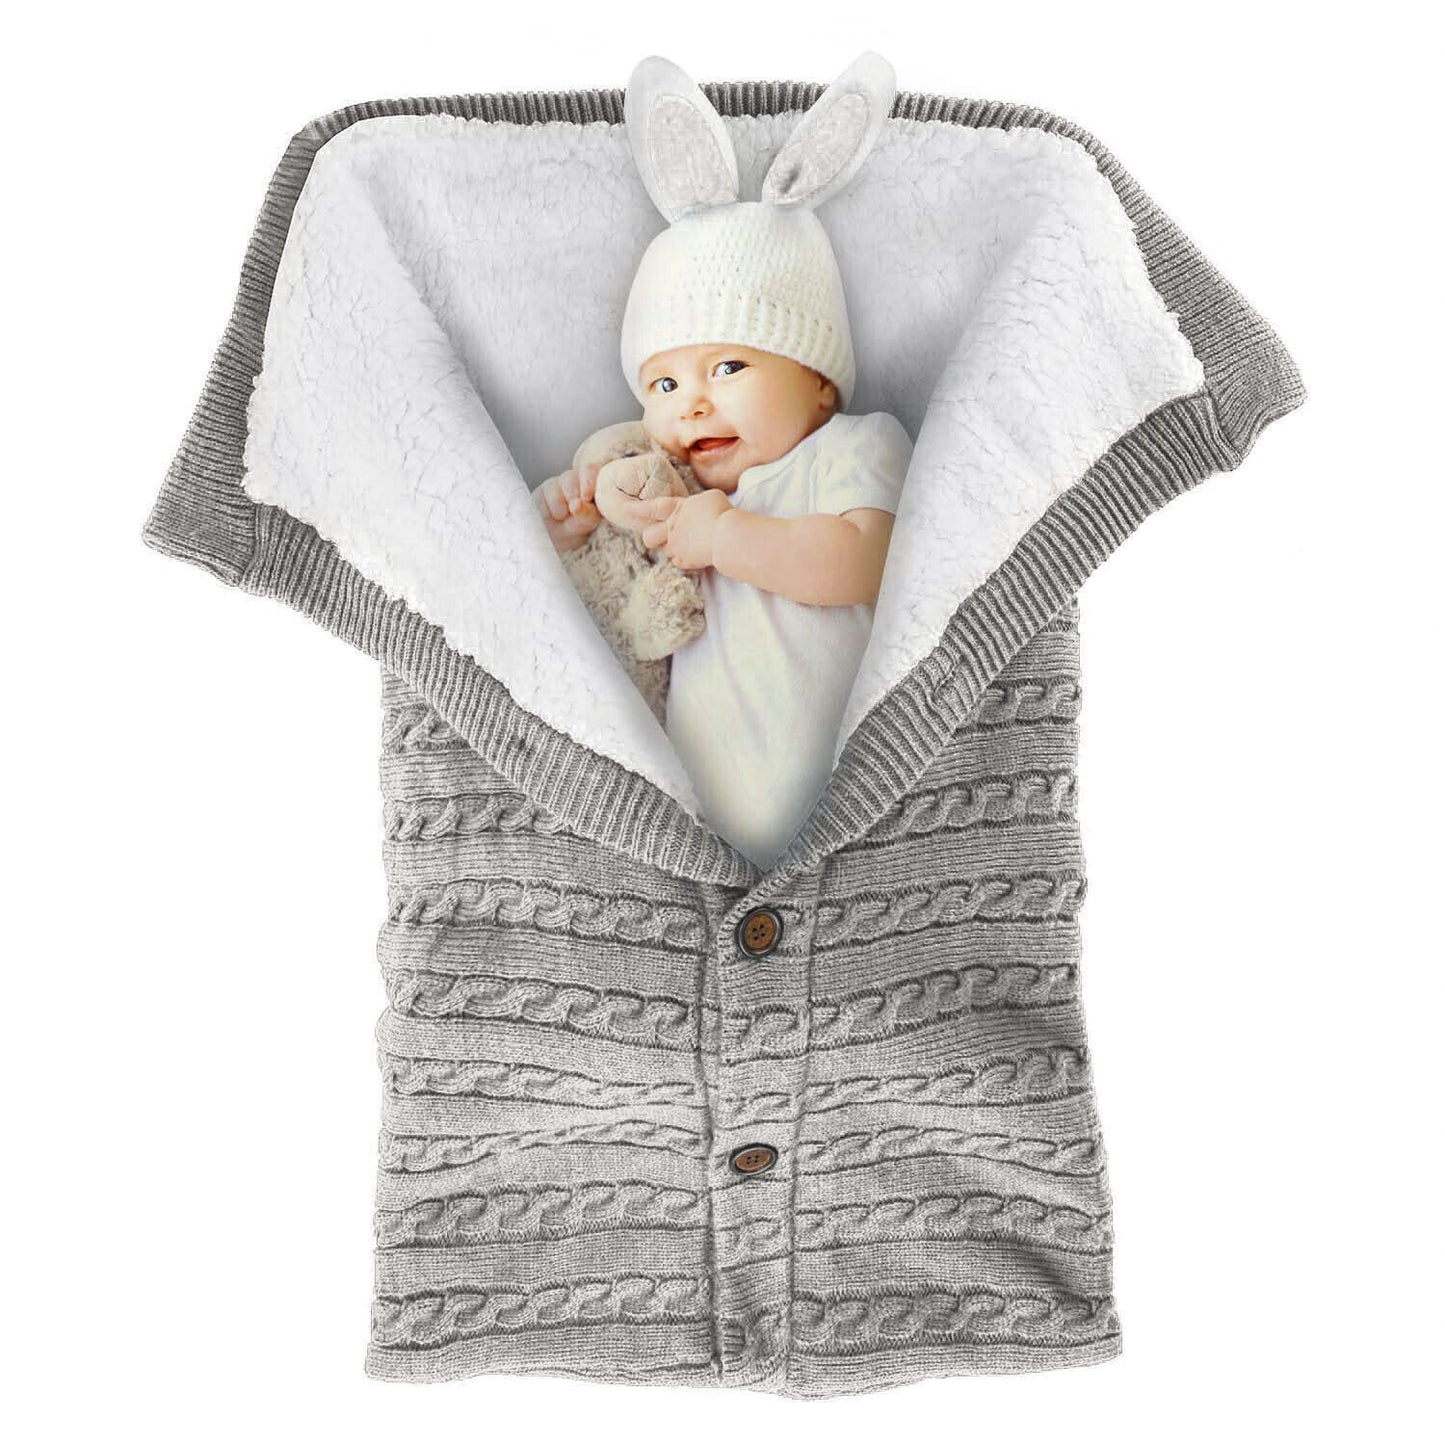 Snuggle Up Your Little One with our Cozy Knit Winter Sleeping Bag - The Perfect Blanket for Newborn Babies on-the-go